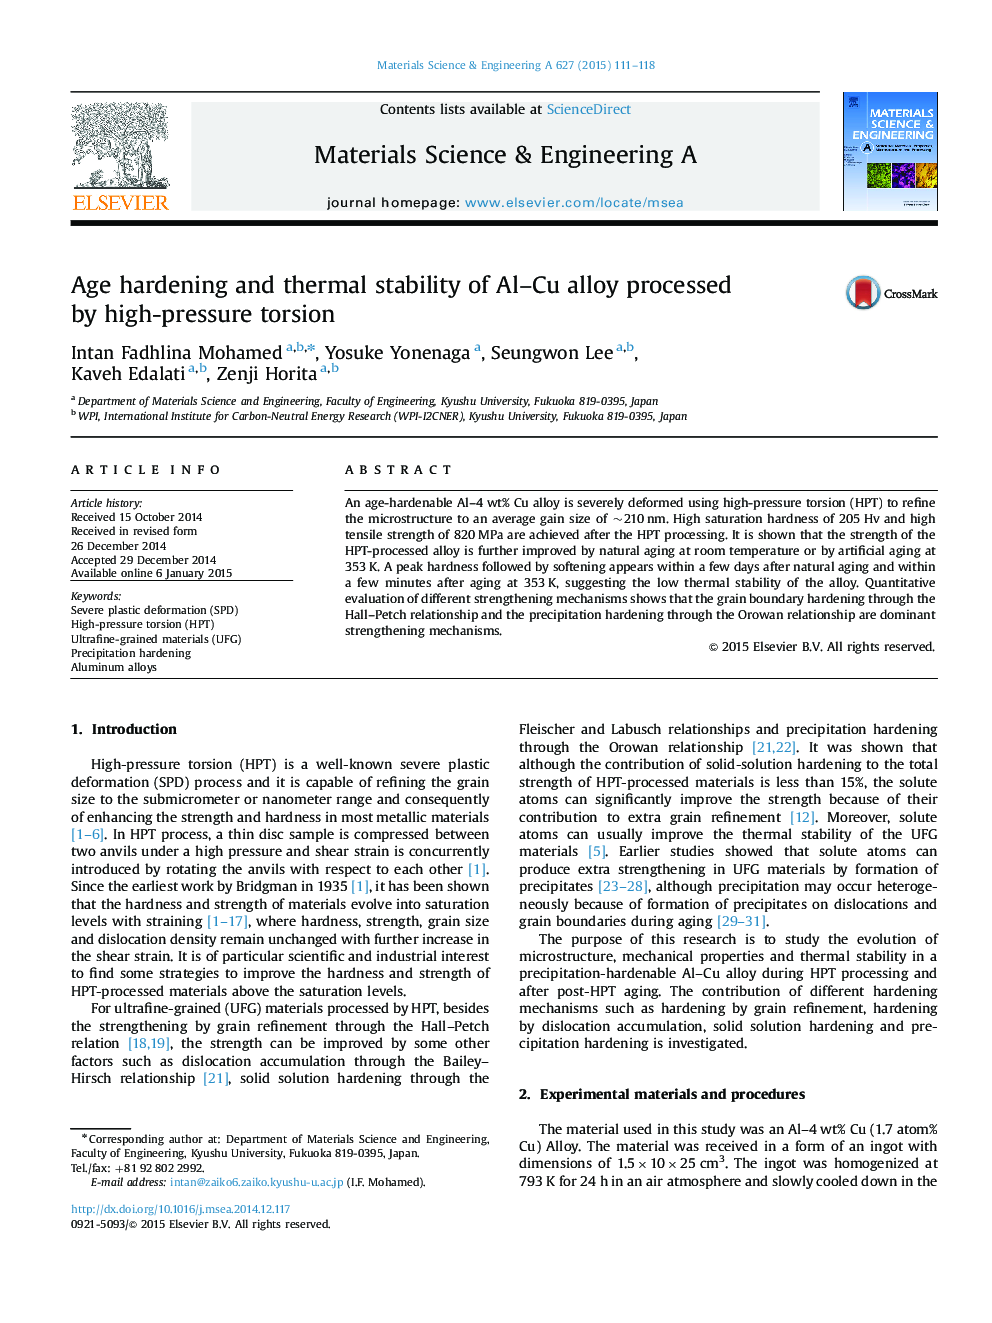 Age hardening and thermal stability of Al-Cu alloy processed by high-pressure torsion